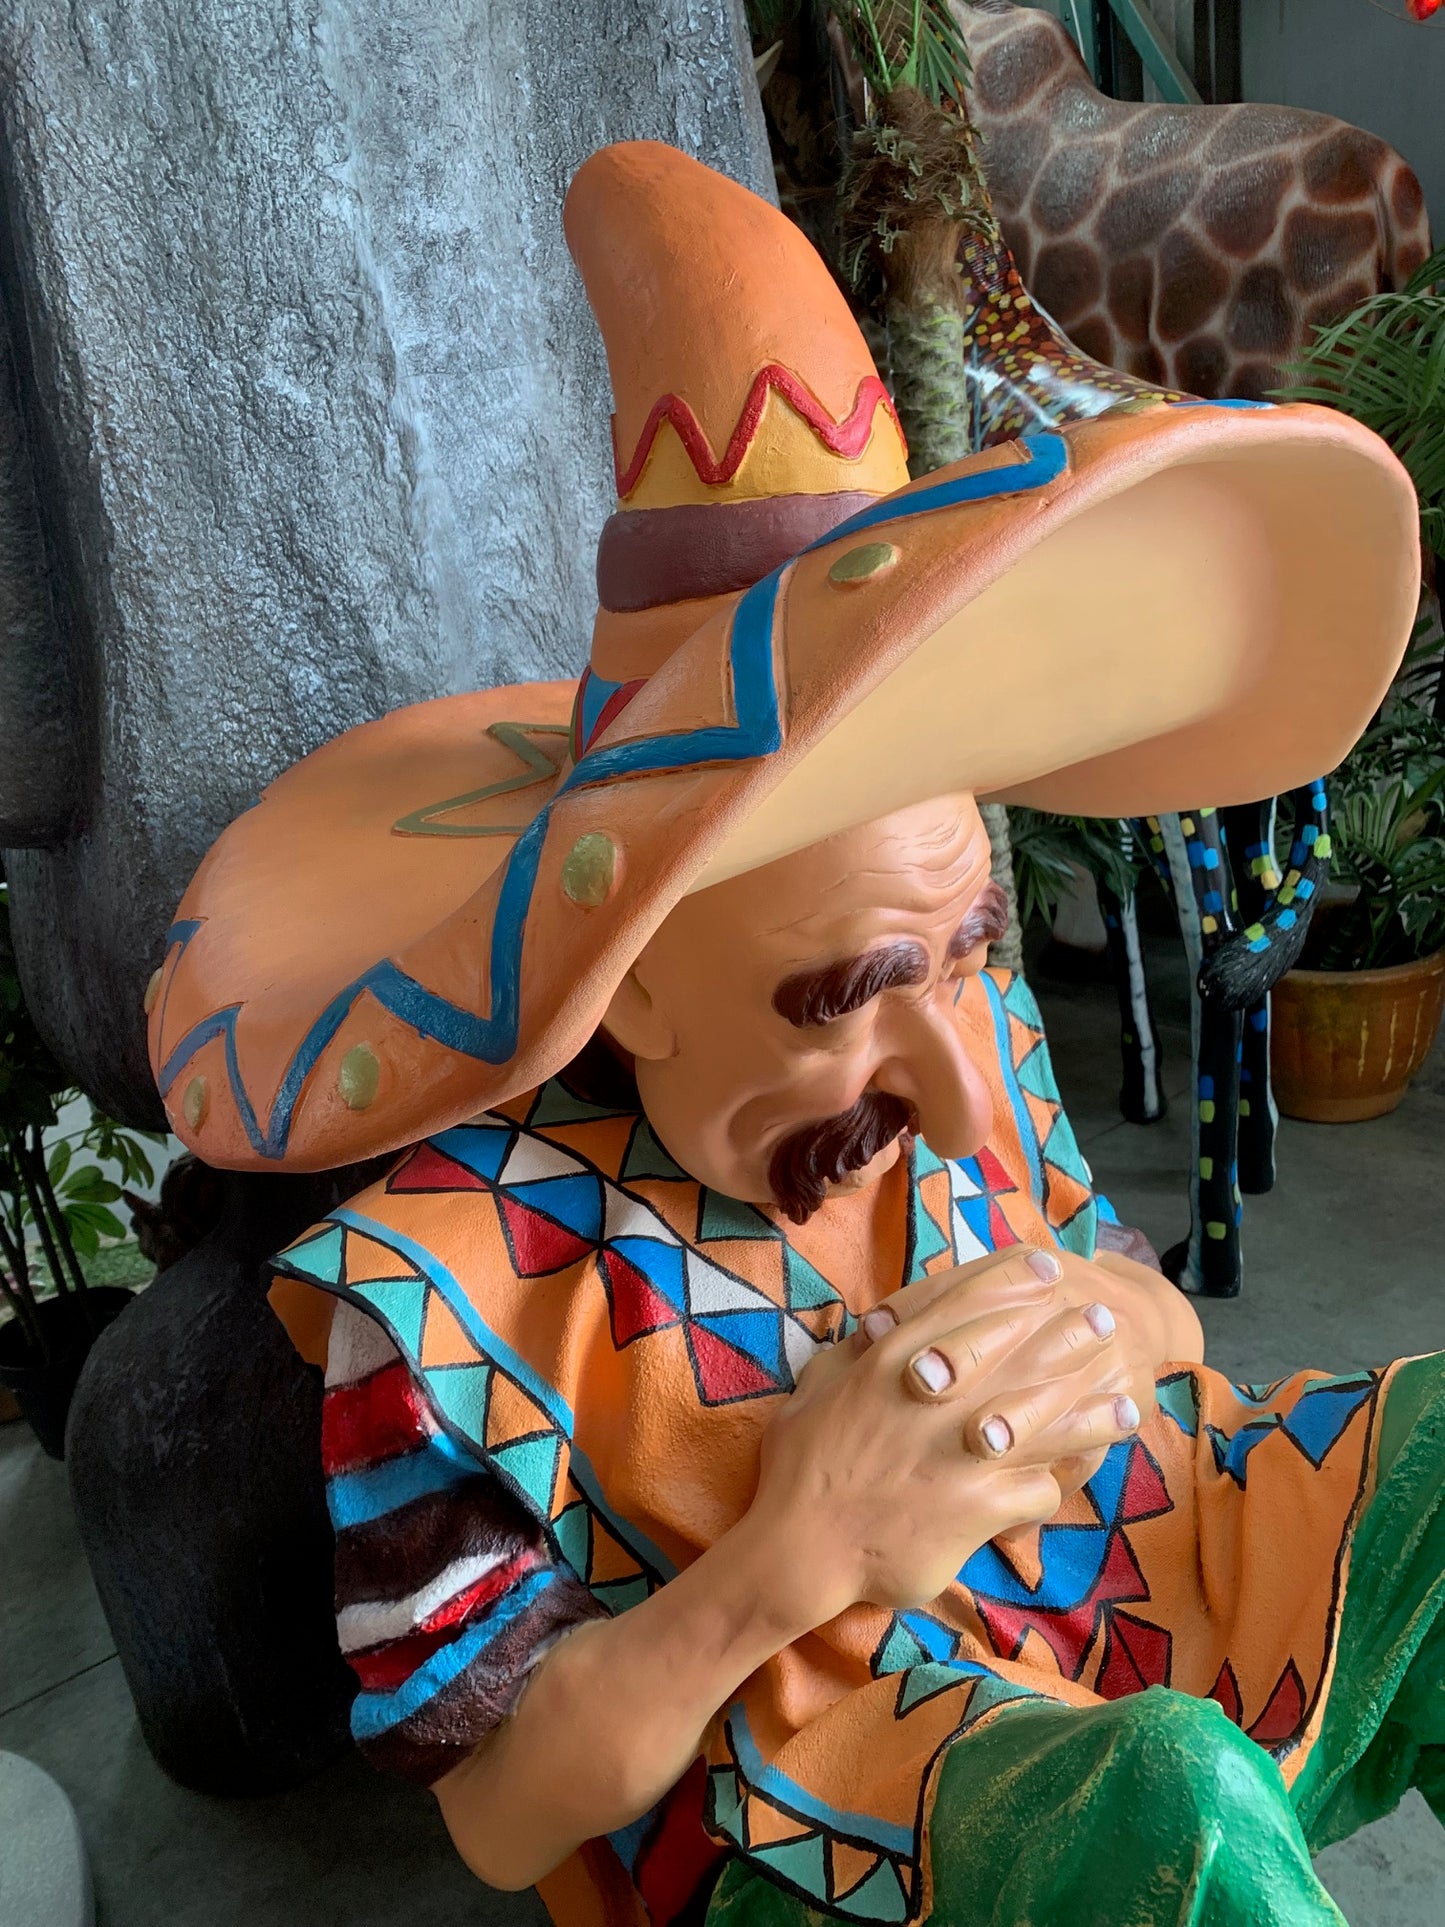 Mexican on Siesta Statue